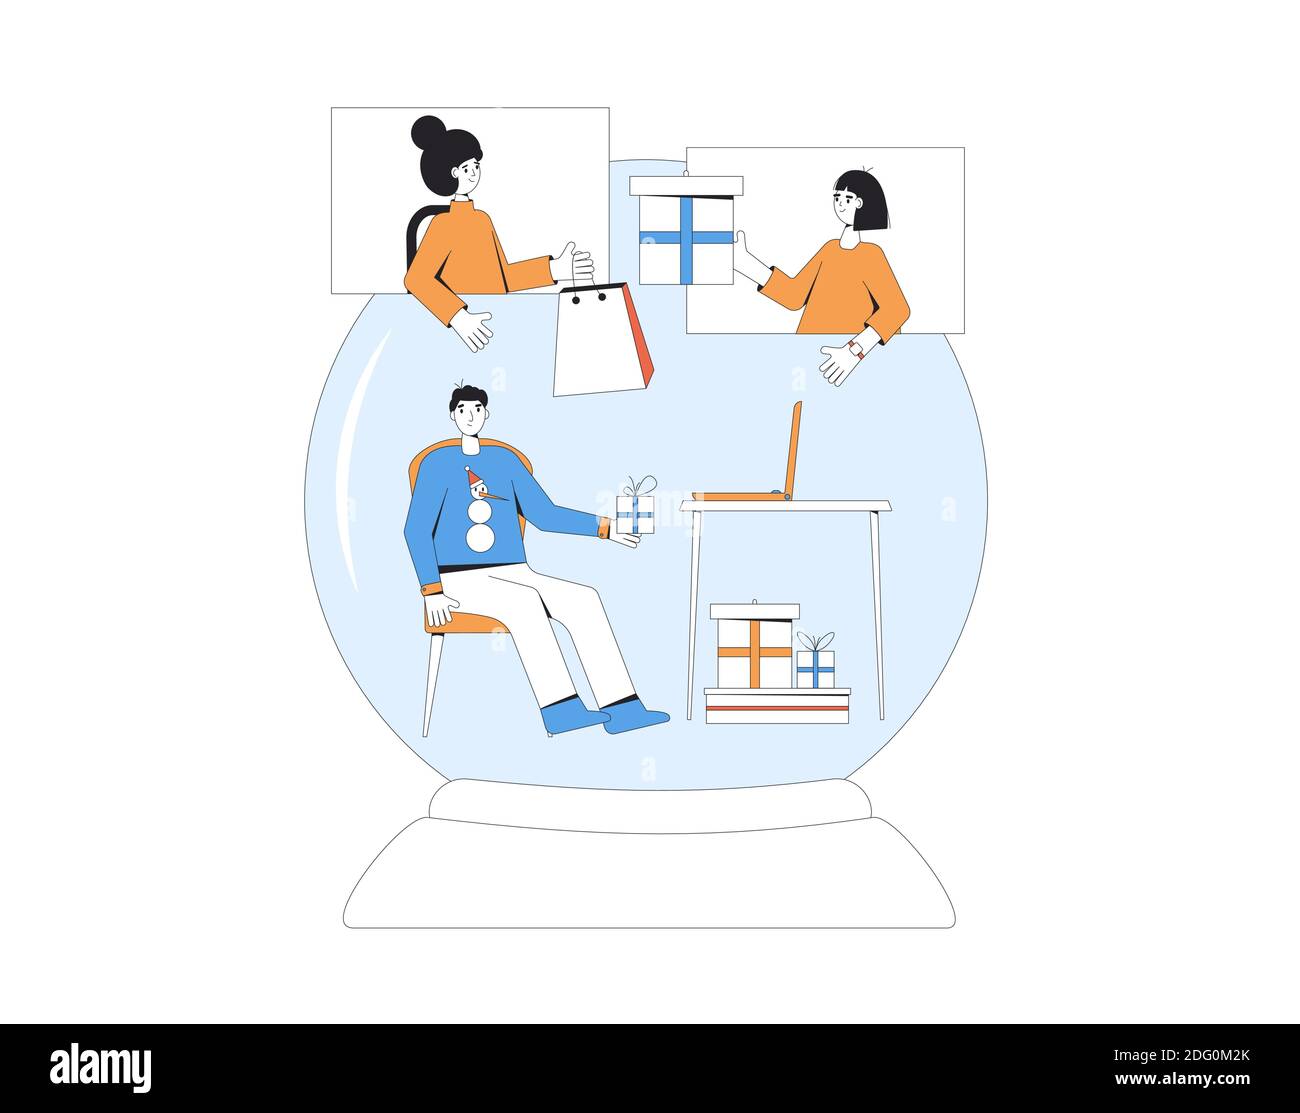 Christmas online meeting. Friends giving a gift. Stay home at holiday. Young persons meeting with video call during a pandemic. Sharing virtual presen Stock Vector